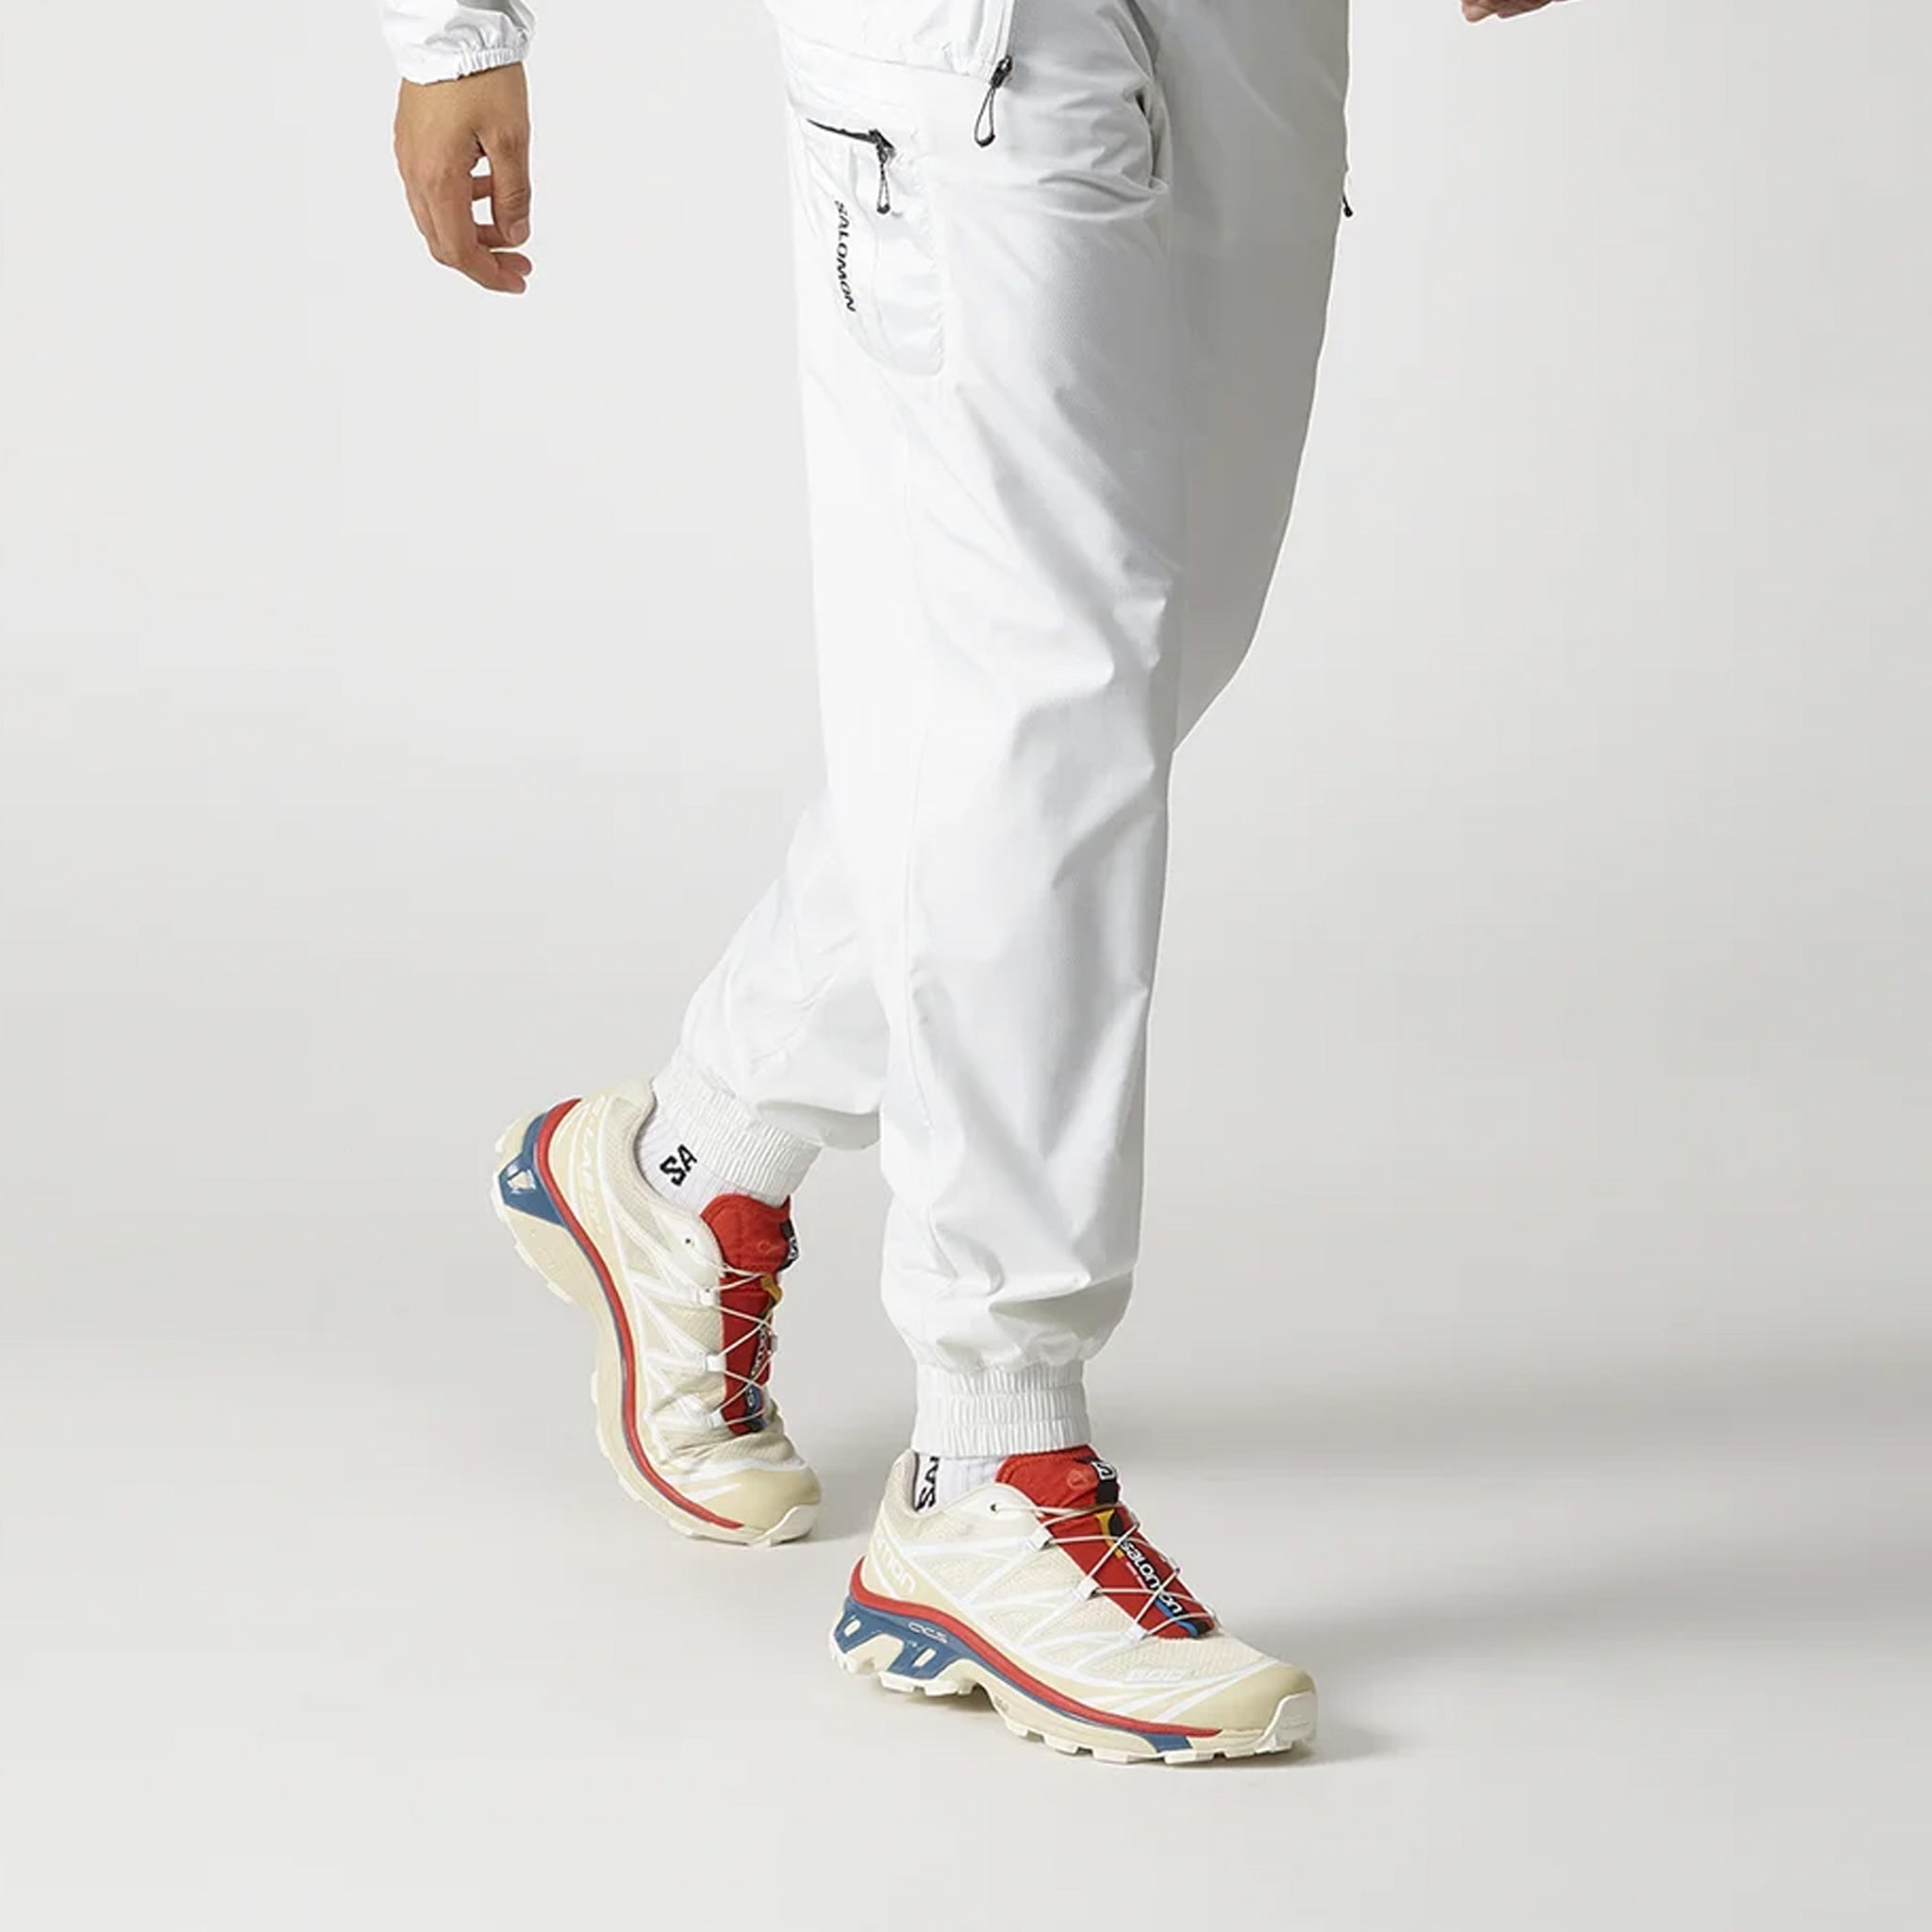 Off white XT-6 Salomon Sneakers with vibrant red and teal blue sole details, as worn by a male model.